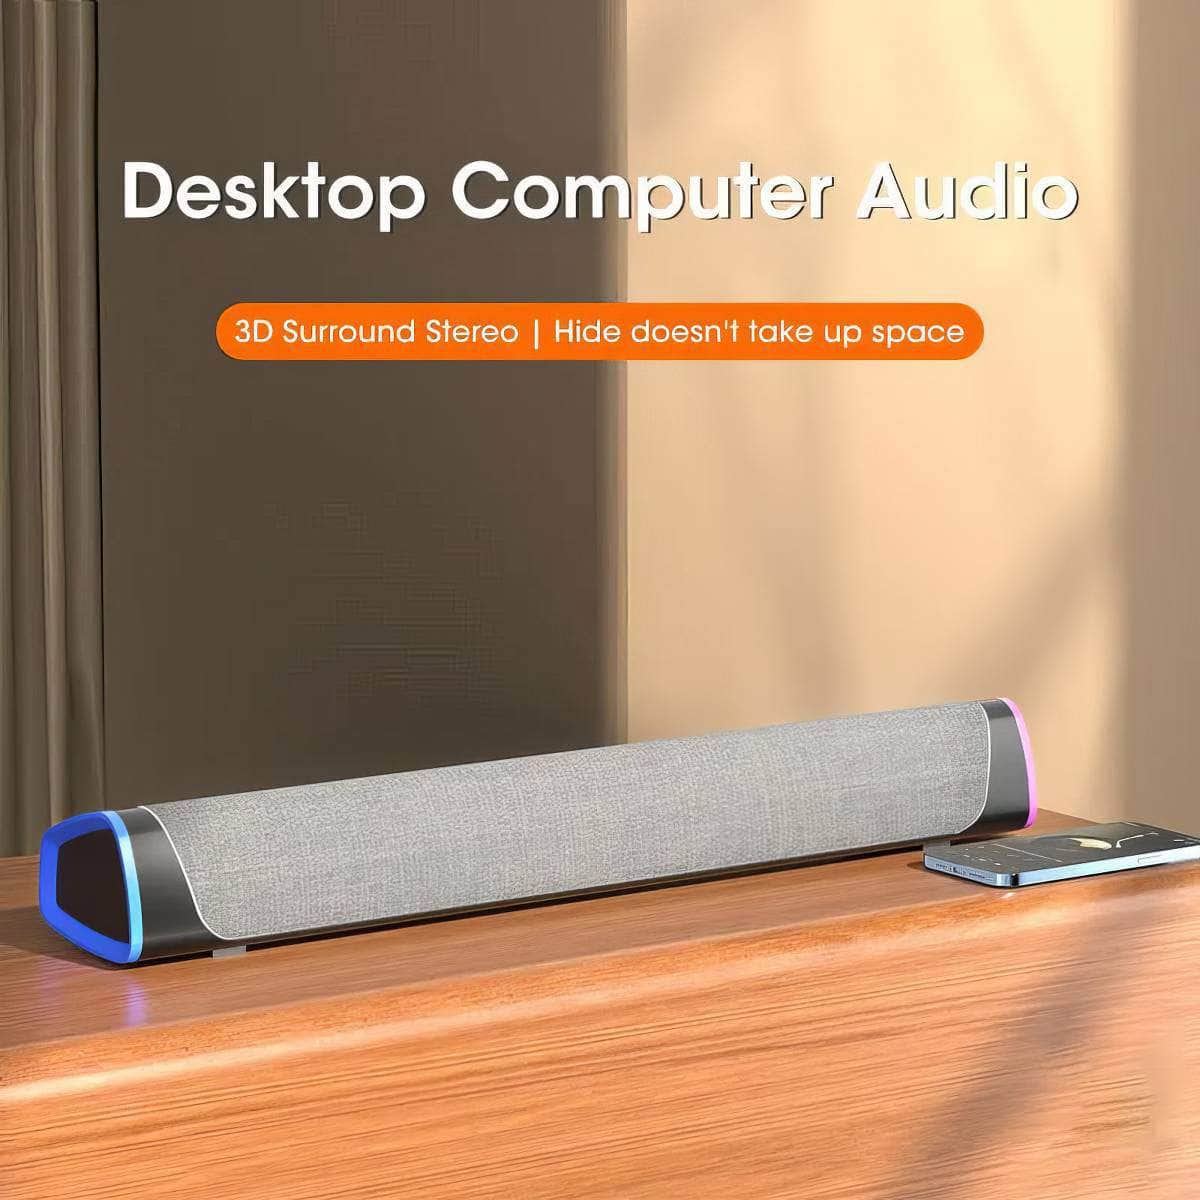 4D Bluetooth Computer Speaker Bar: Stereo Sound, Subwoofer, Wired